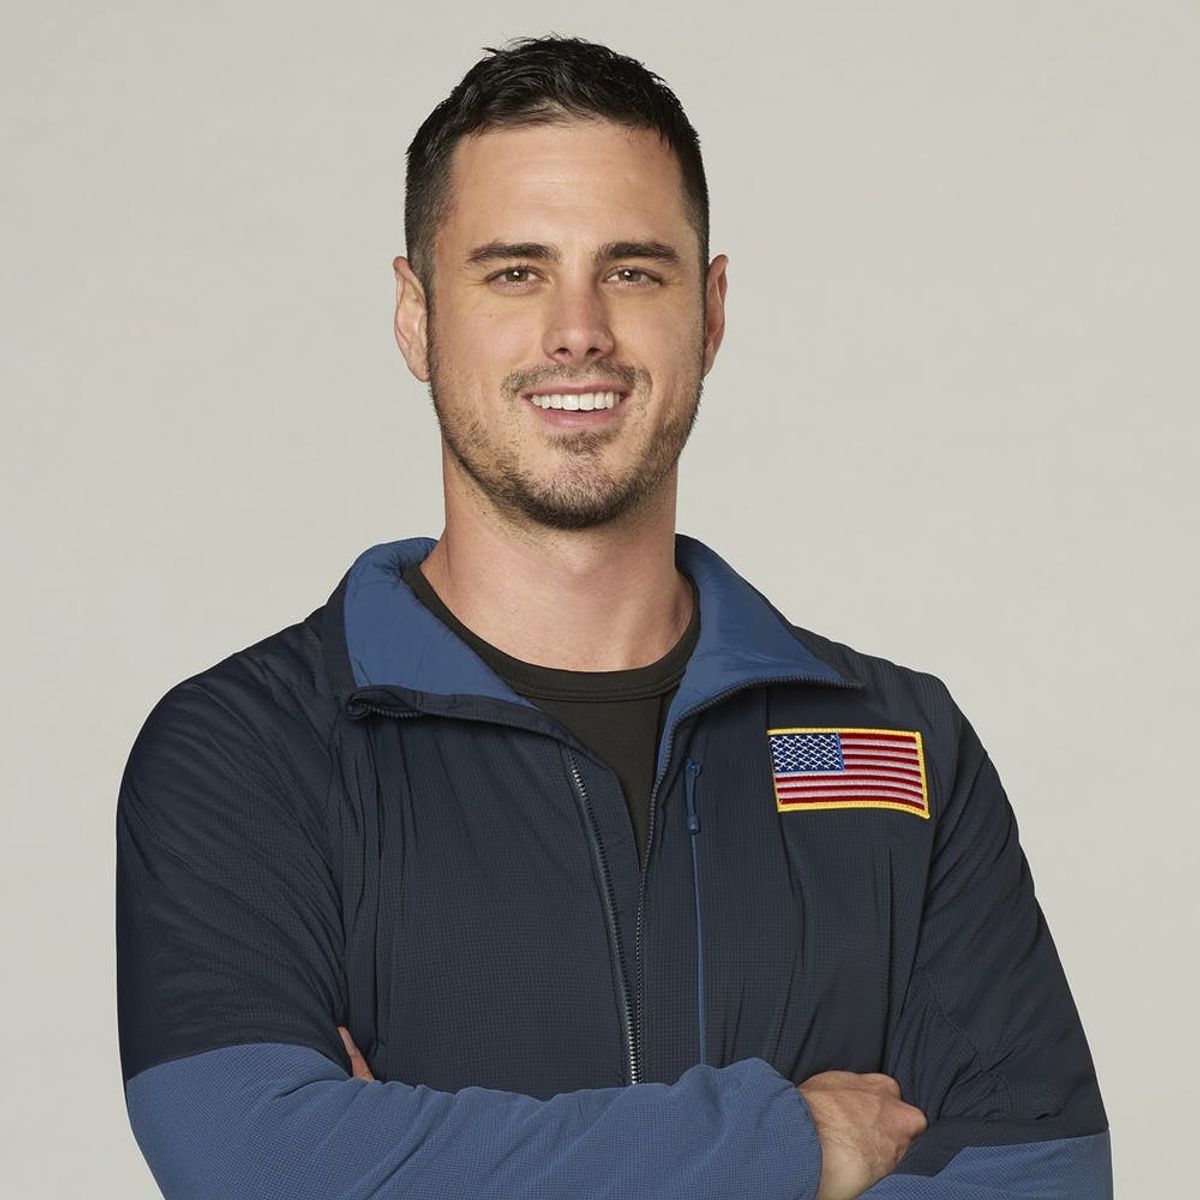 Fans Want Ben Higgins to Return as the Bachelor — But Is He Ready?